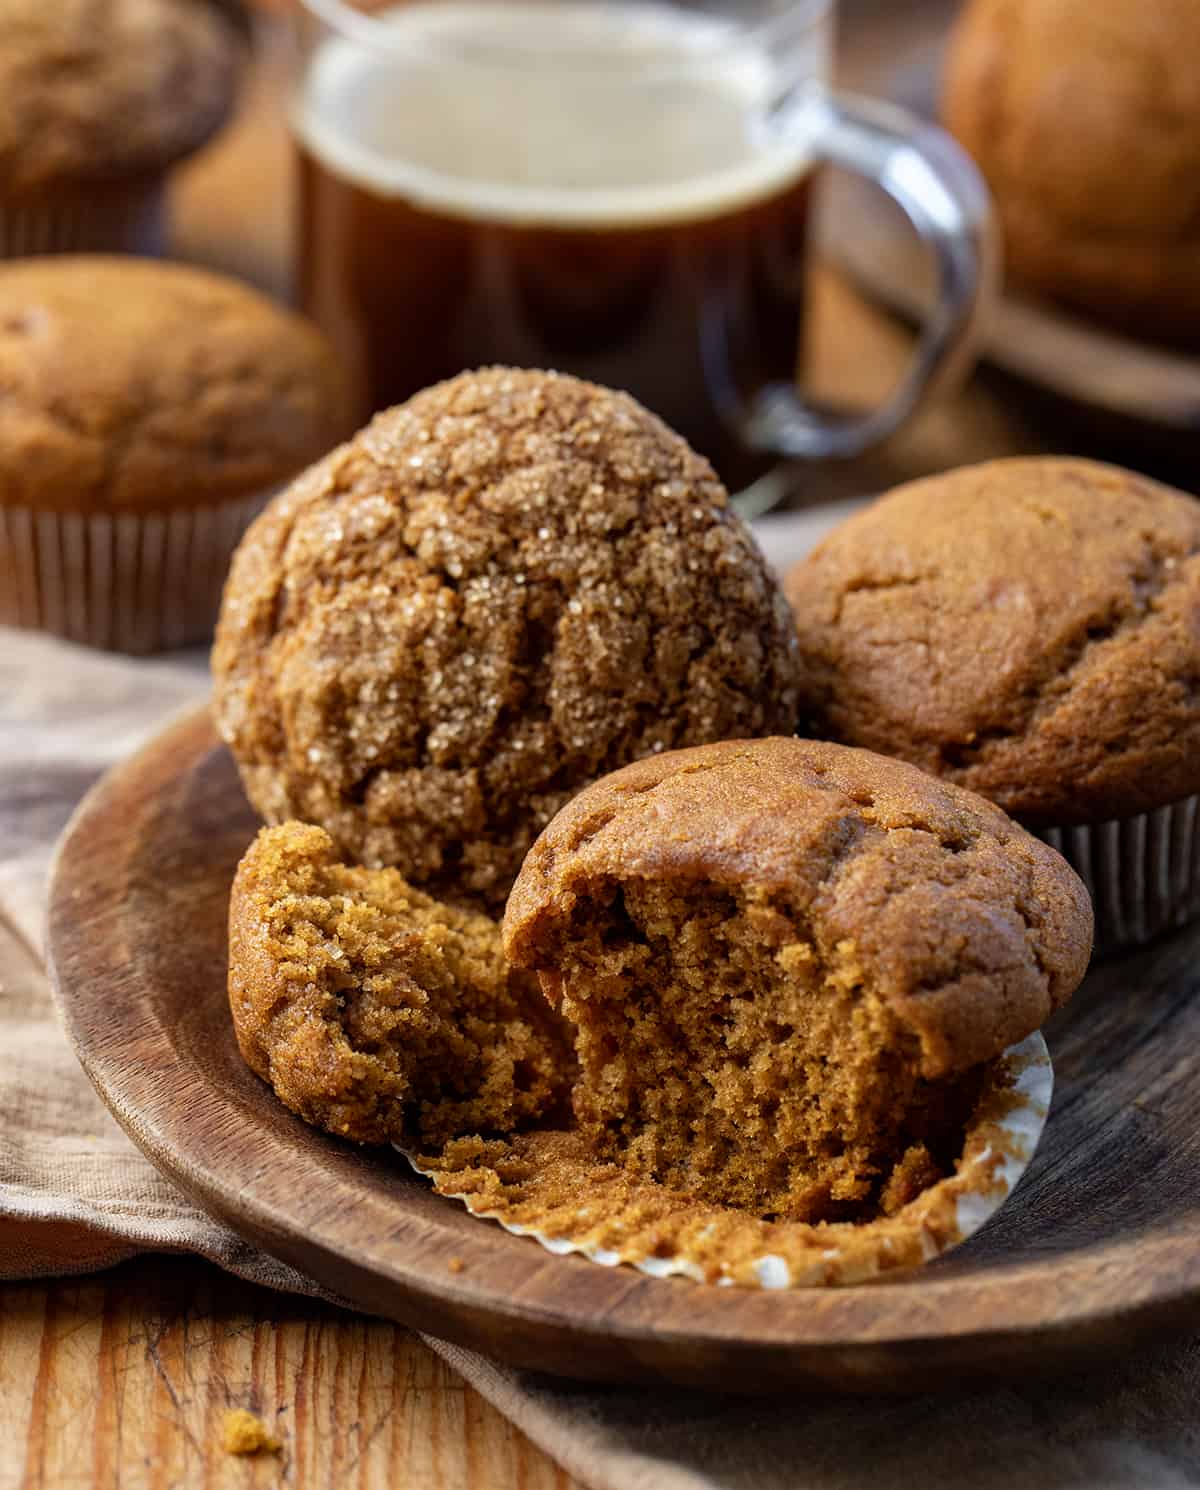 Pumpkin Spice Muffins on a wooden plate with one halved, showing inside texture.